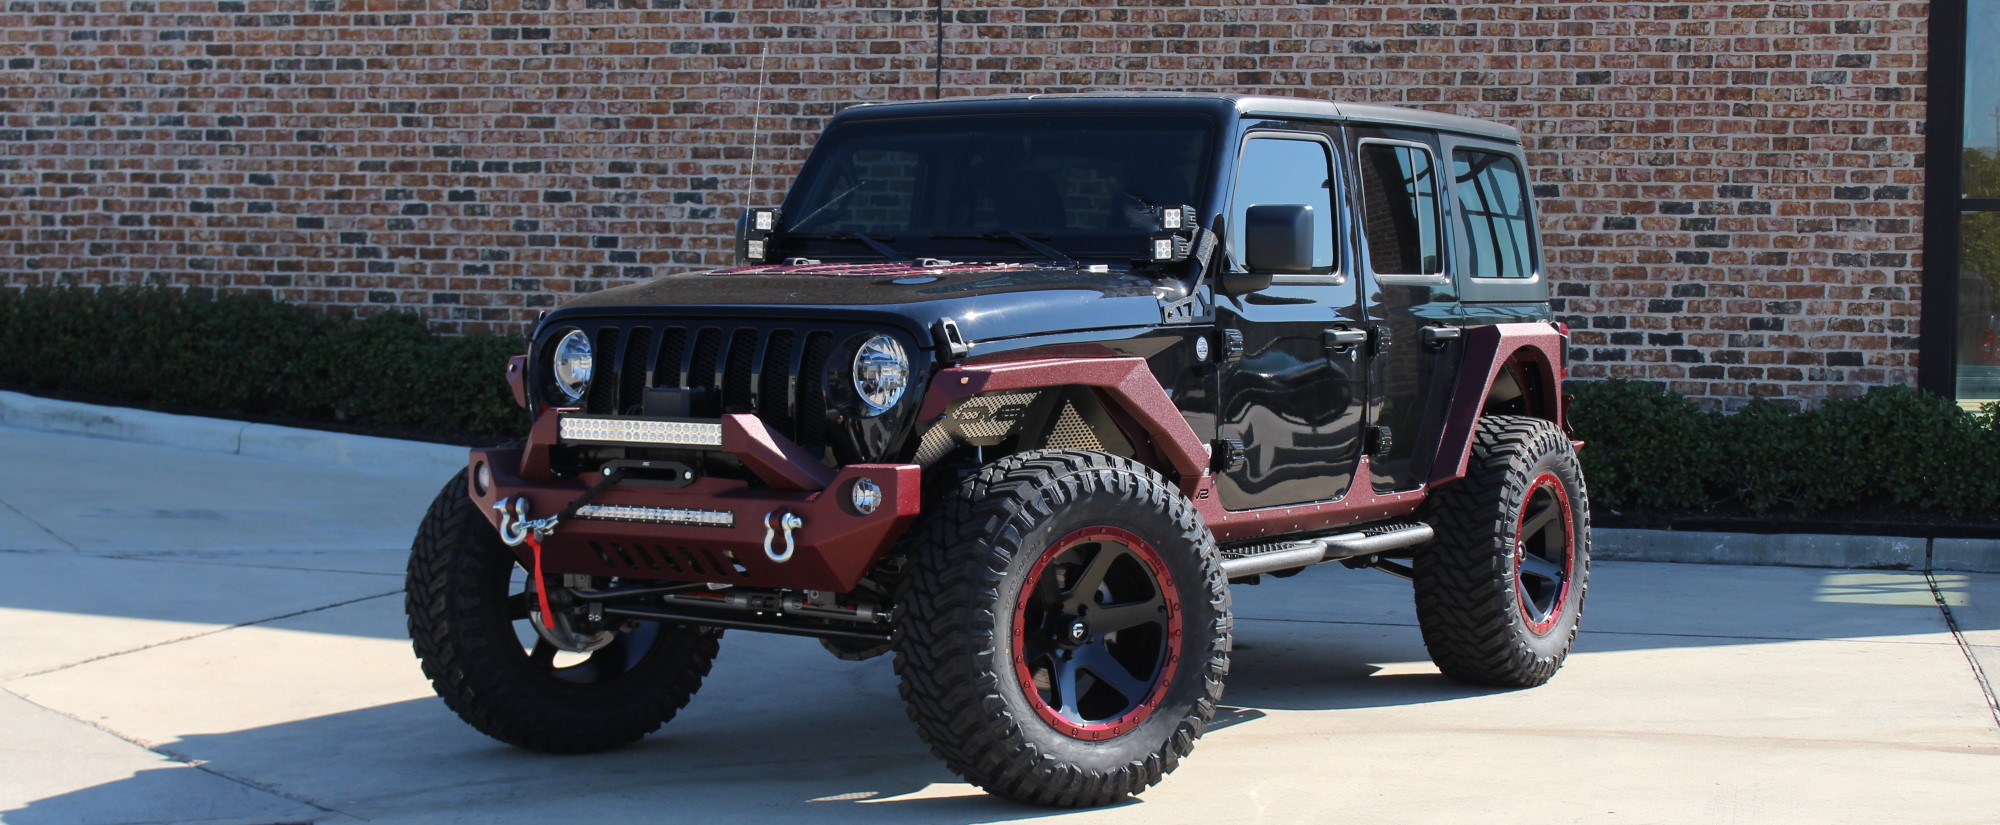 2020 Black and Maroon JL Jeep Build – AWT Jeep Edition